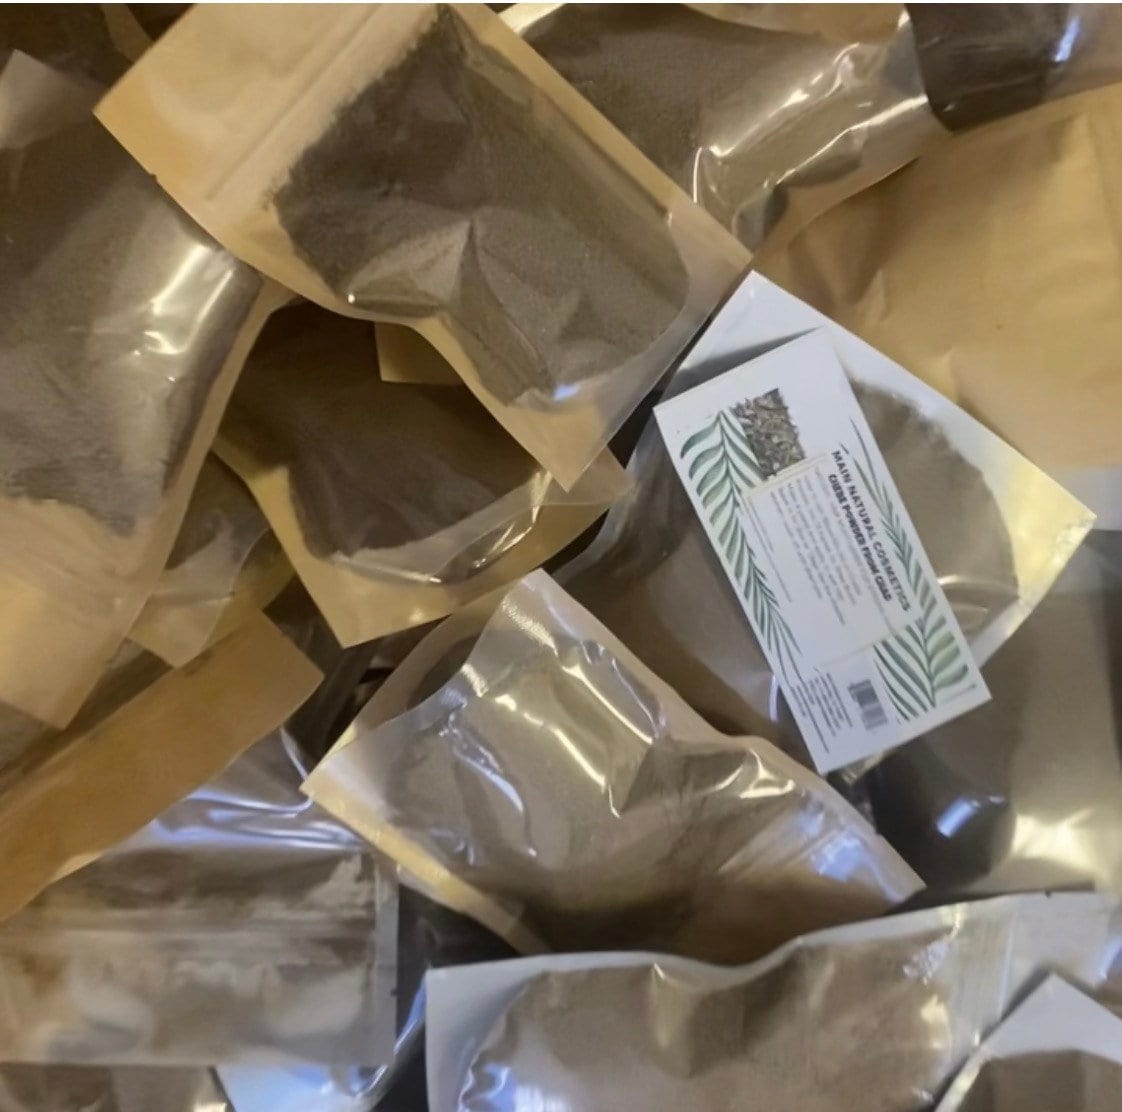 1kg-100kg 100% Authentic Chebe Powder Bulk Sale From Chad  |Private Label|Wholesale|Drop Shipping